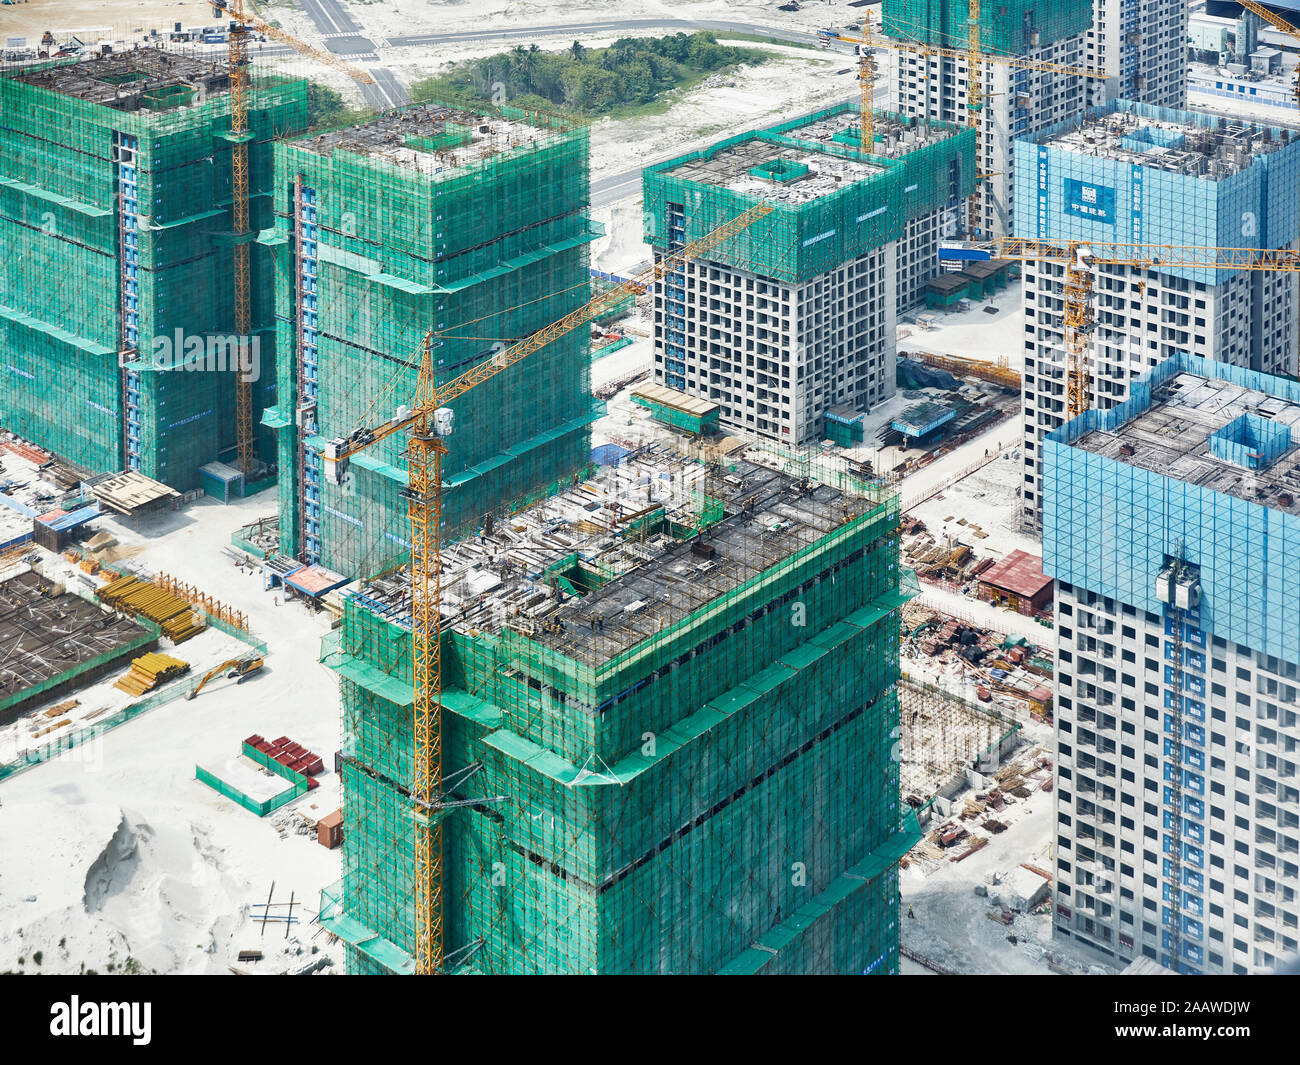 View of construction site during winter seen through airplane window at Malè, Maldives Stock Photo